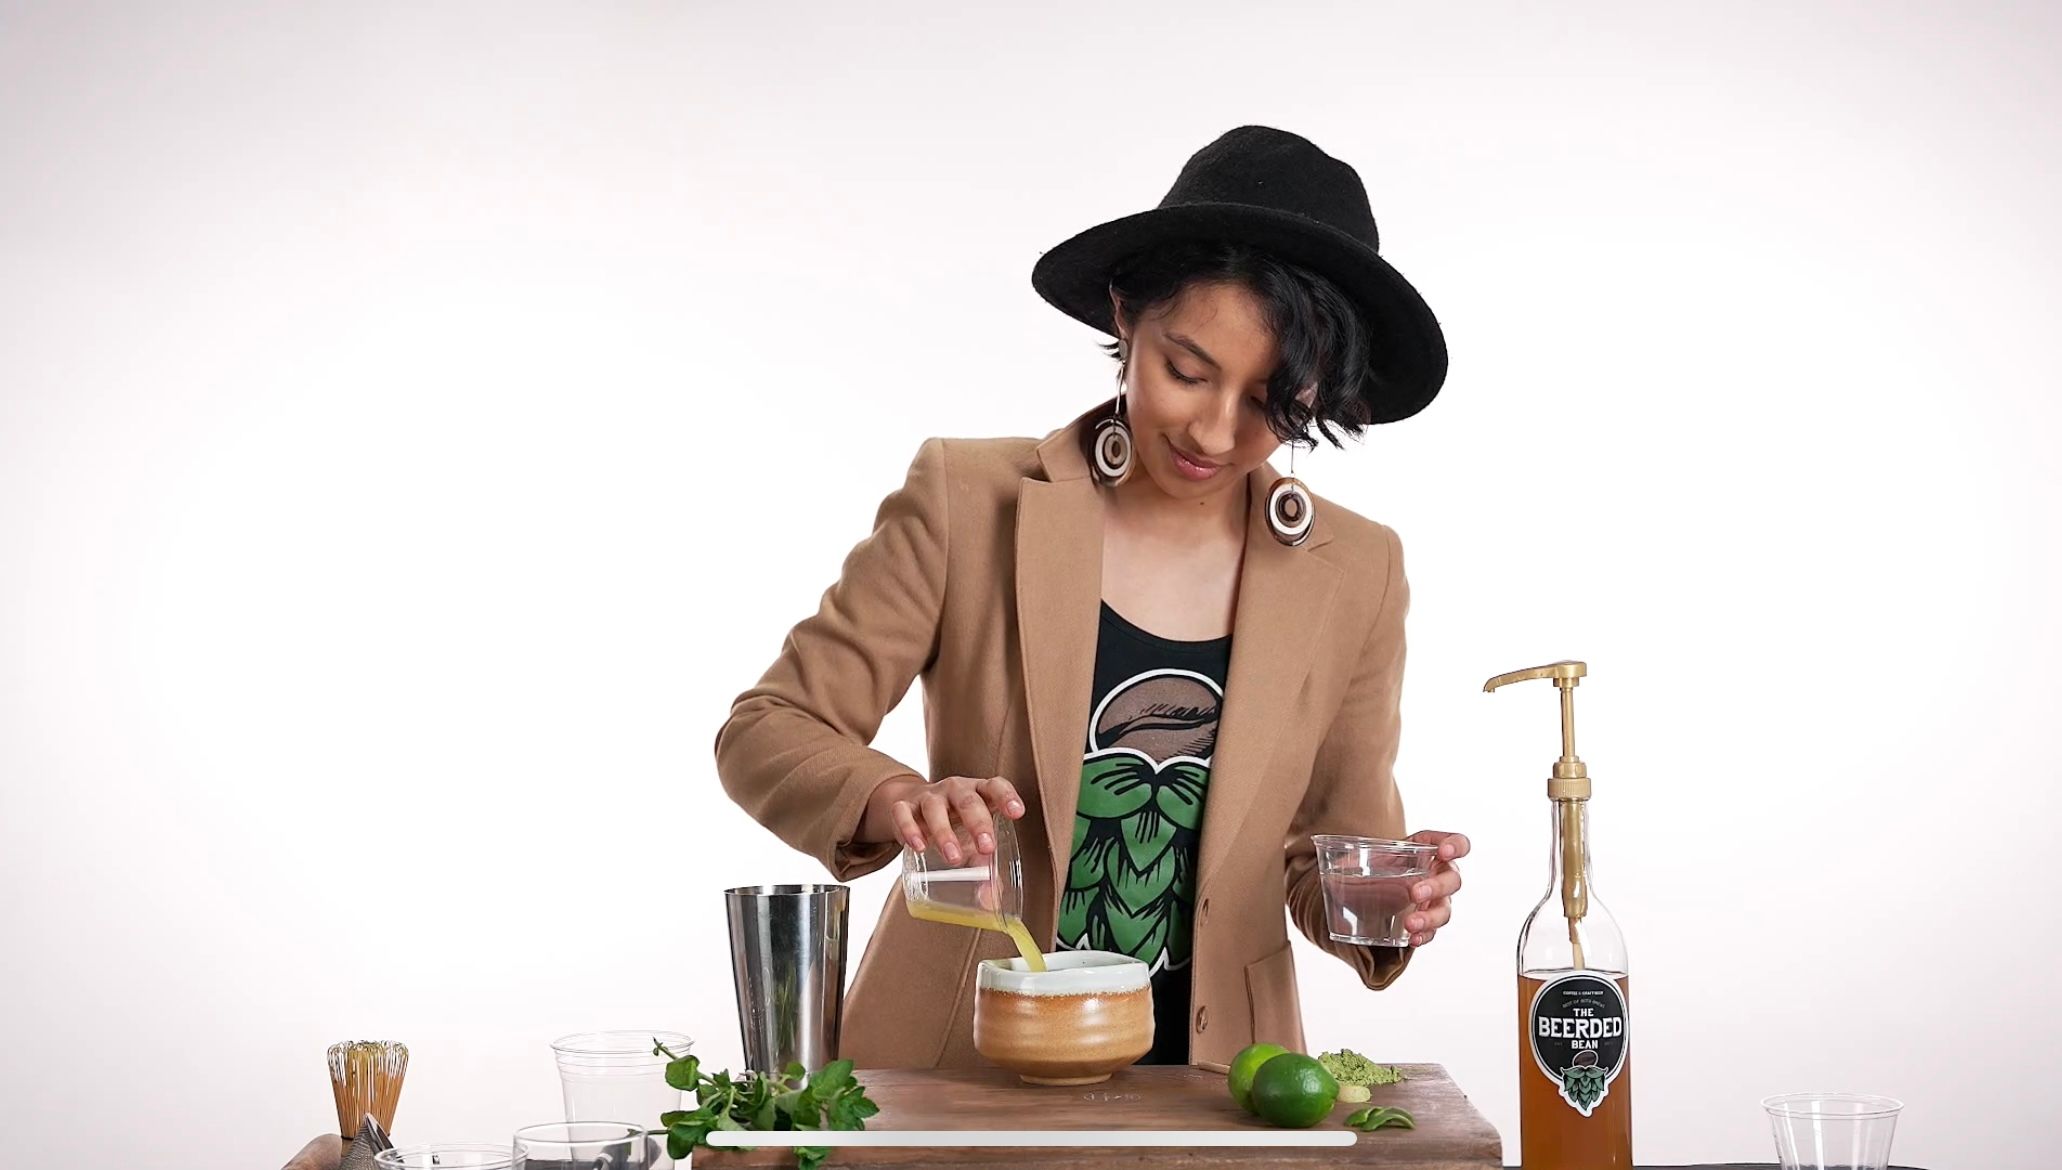 A young woman pouring coffee into a mug, captured in a snapshot from a video production by Media Knowledge Group for a coffee company.